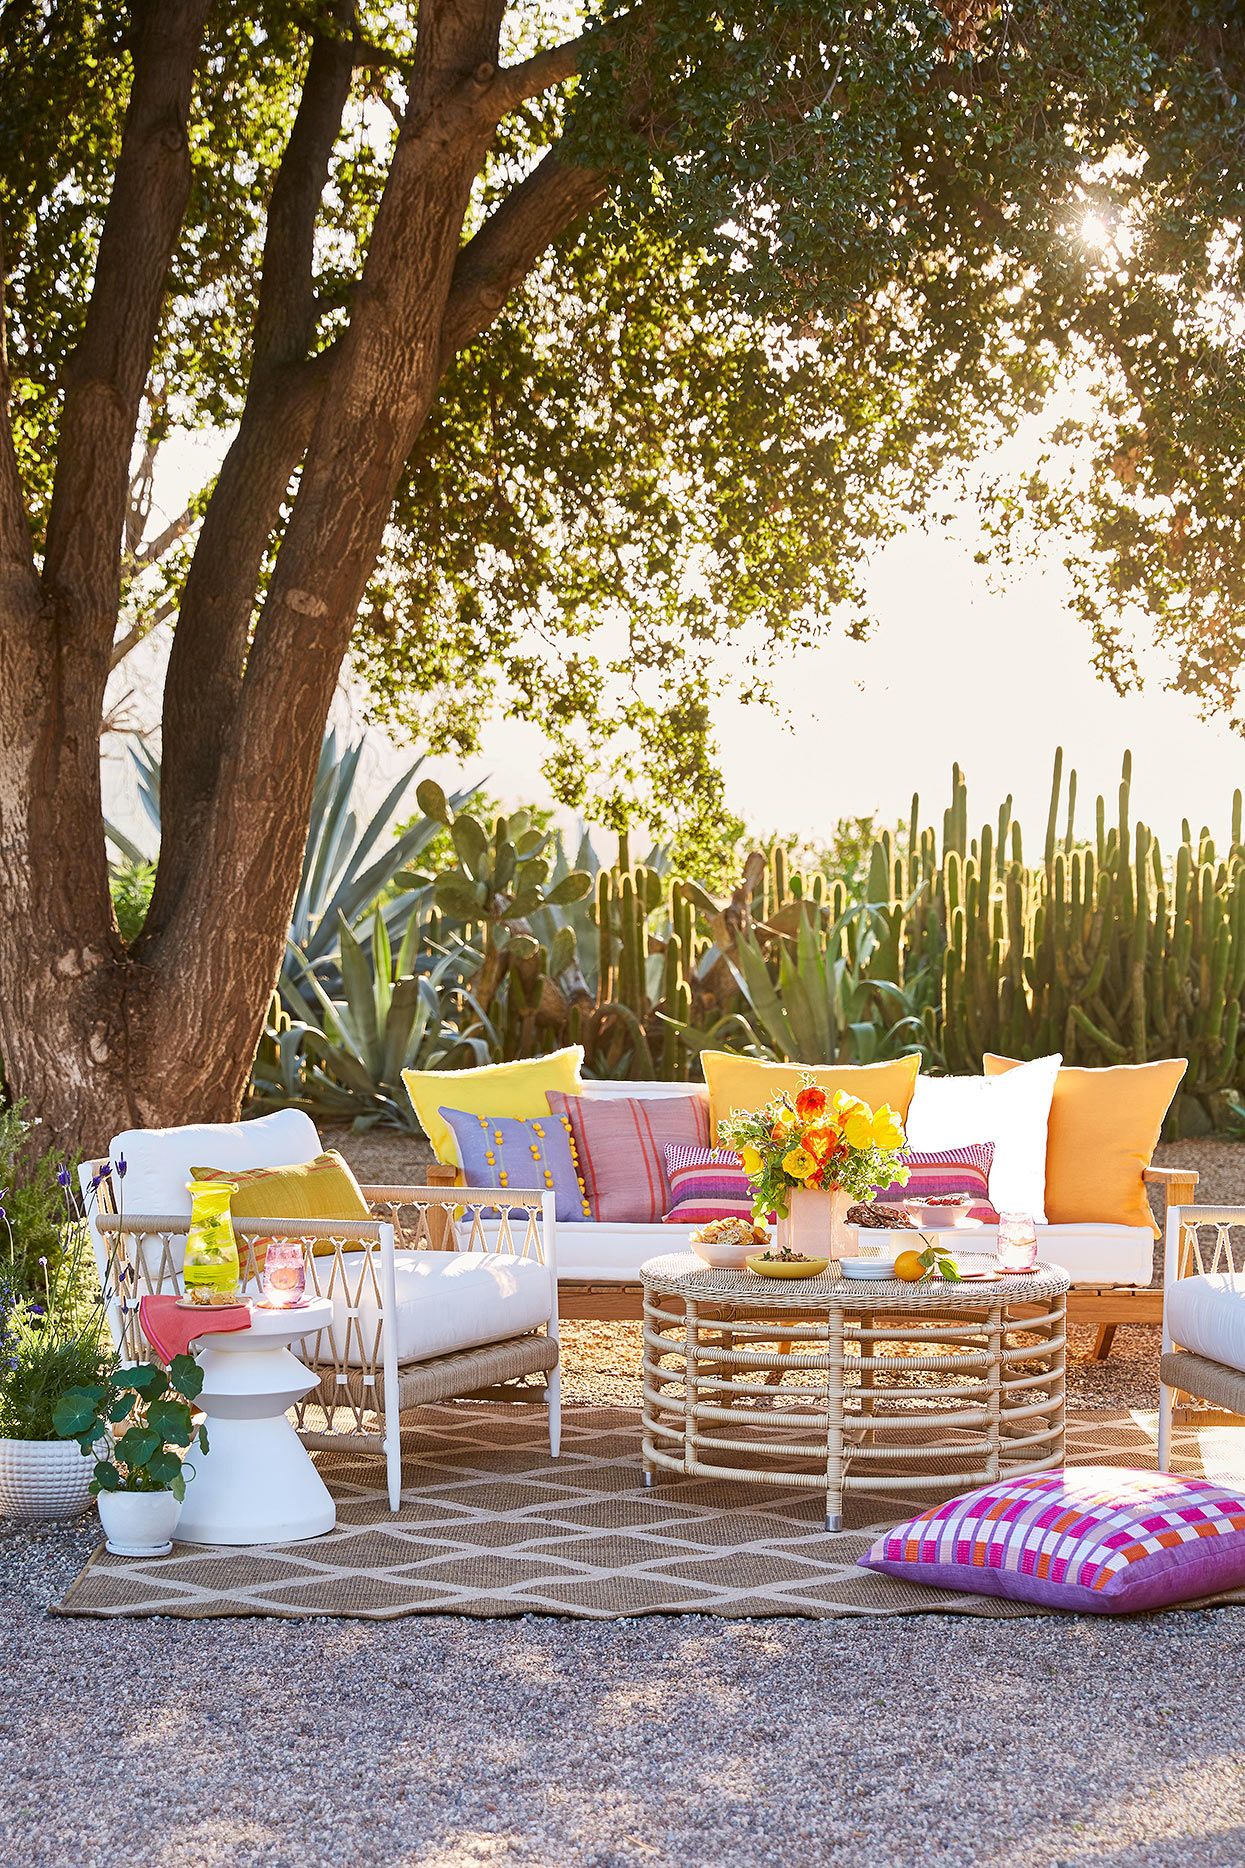 8 Tips To Help You Choose The Best Patio Furniture For Your Outdoor Space Decor Report 